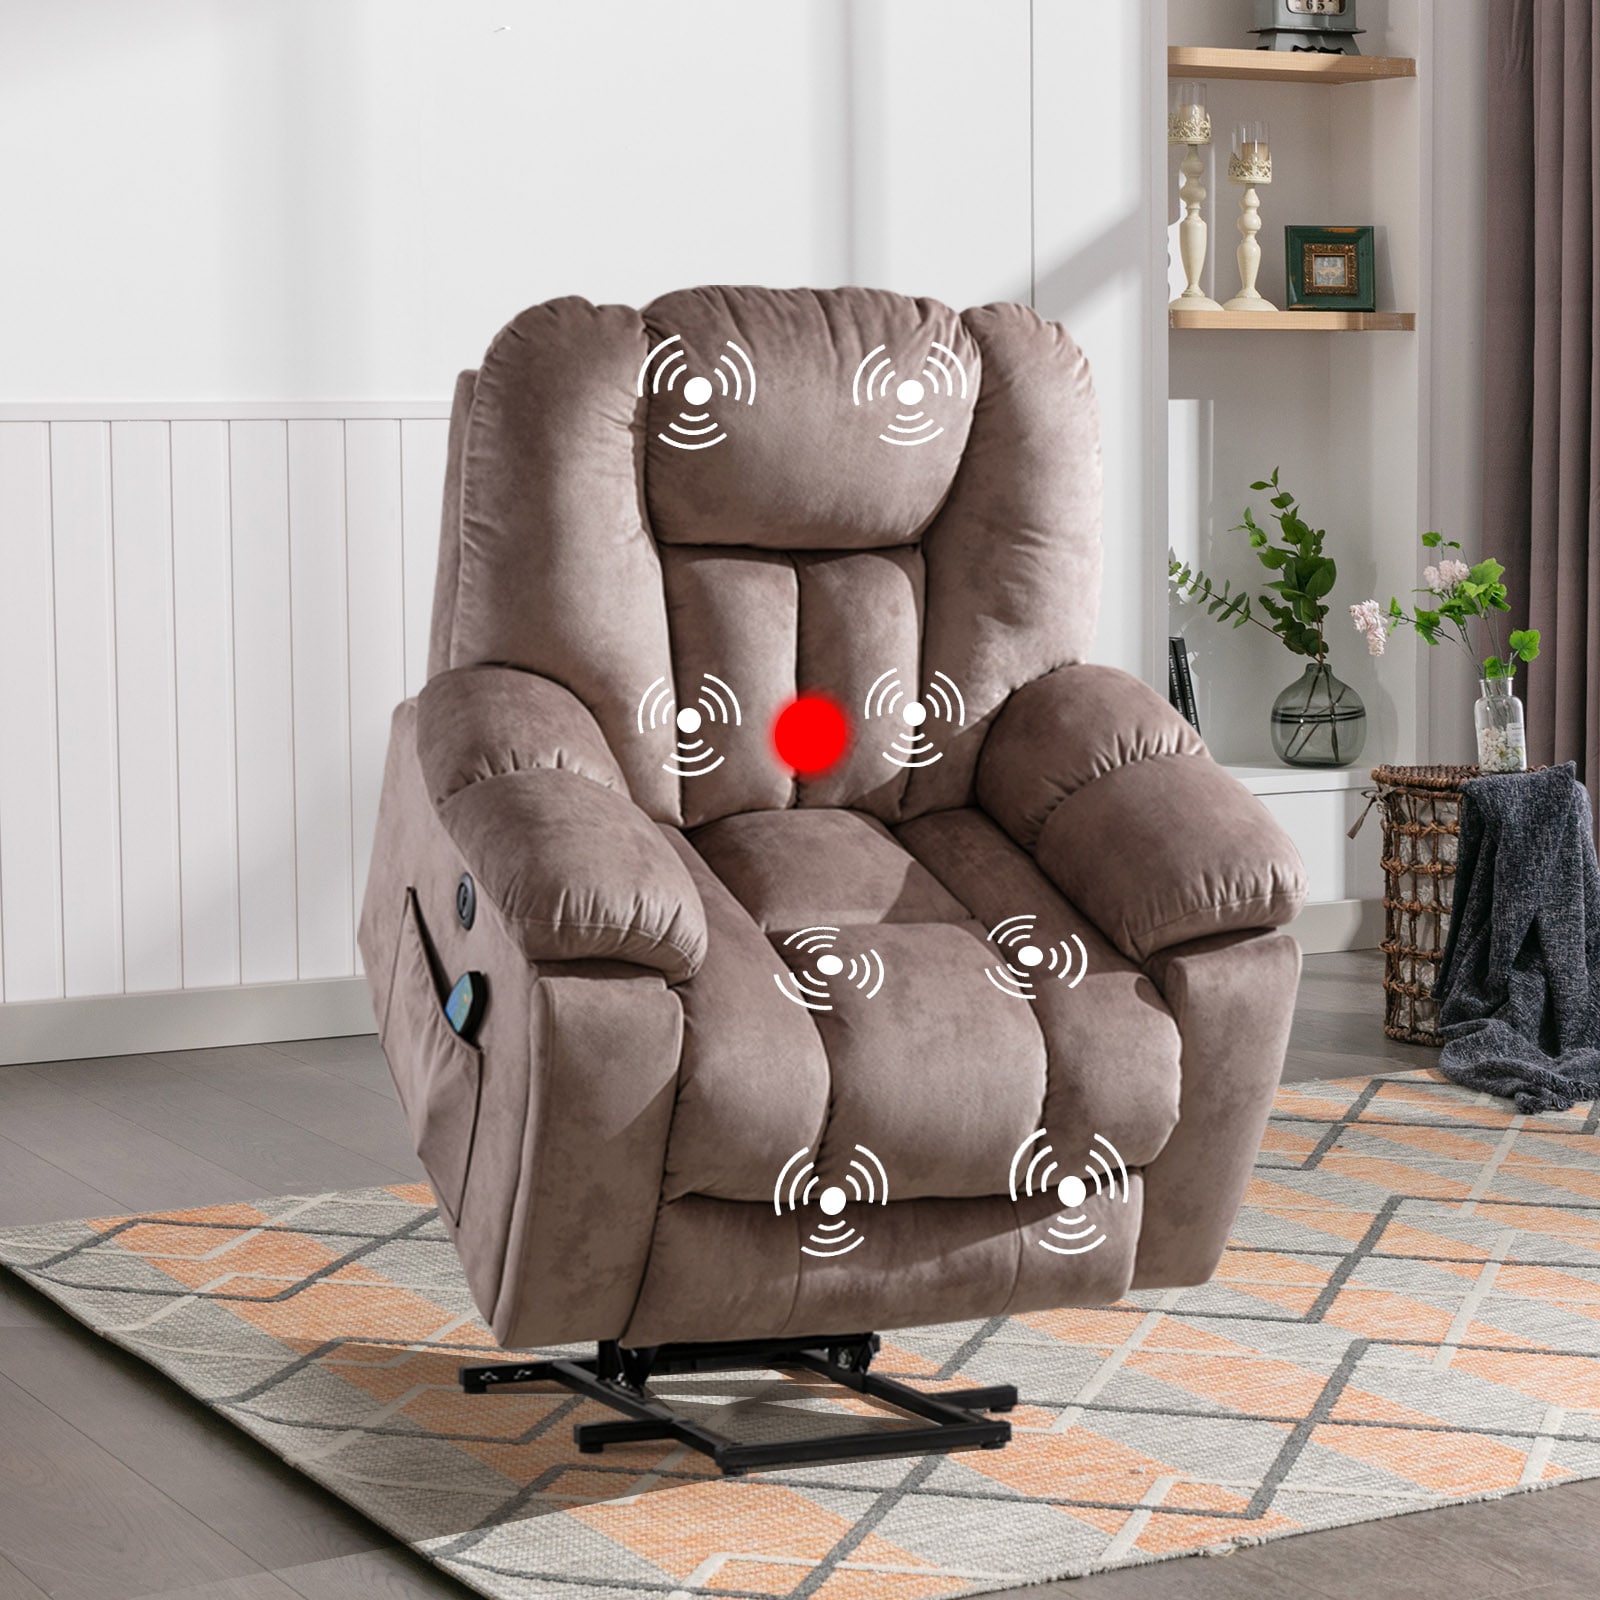 Costway Grey Fabric Power Lift Recliner Chair Sofa for Elderly w